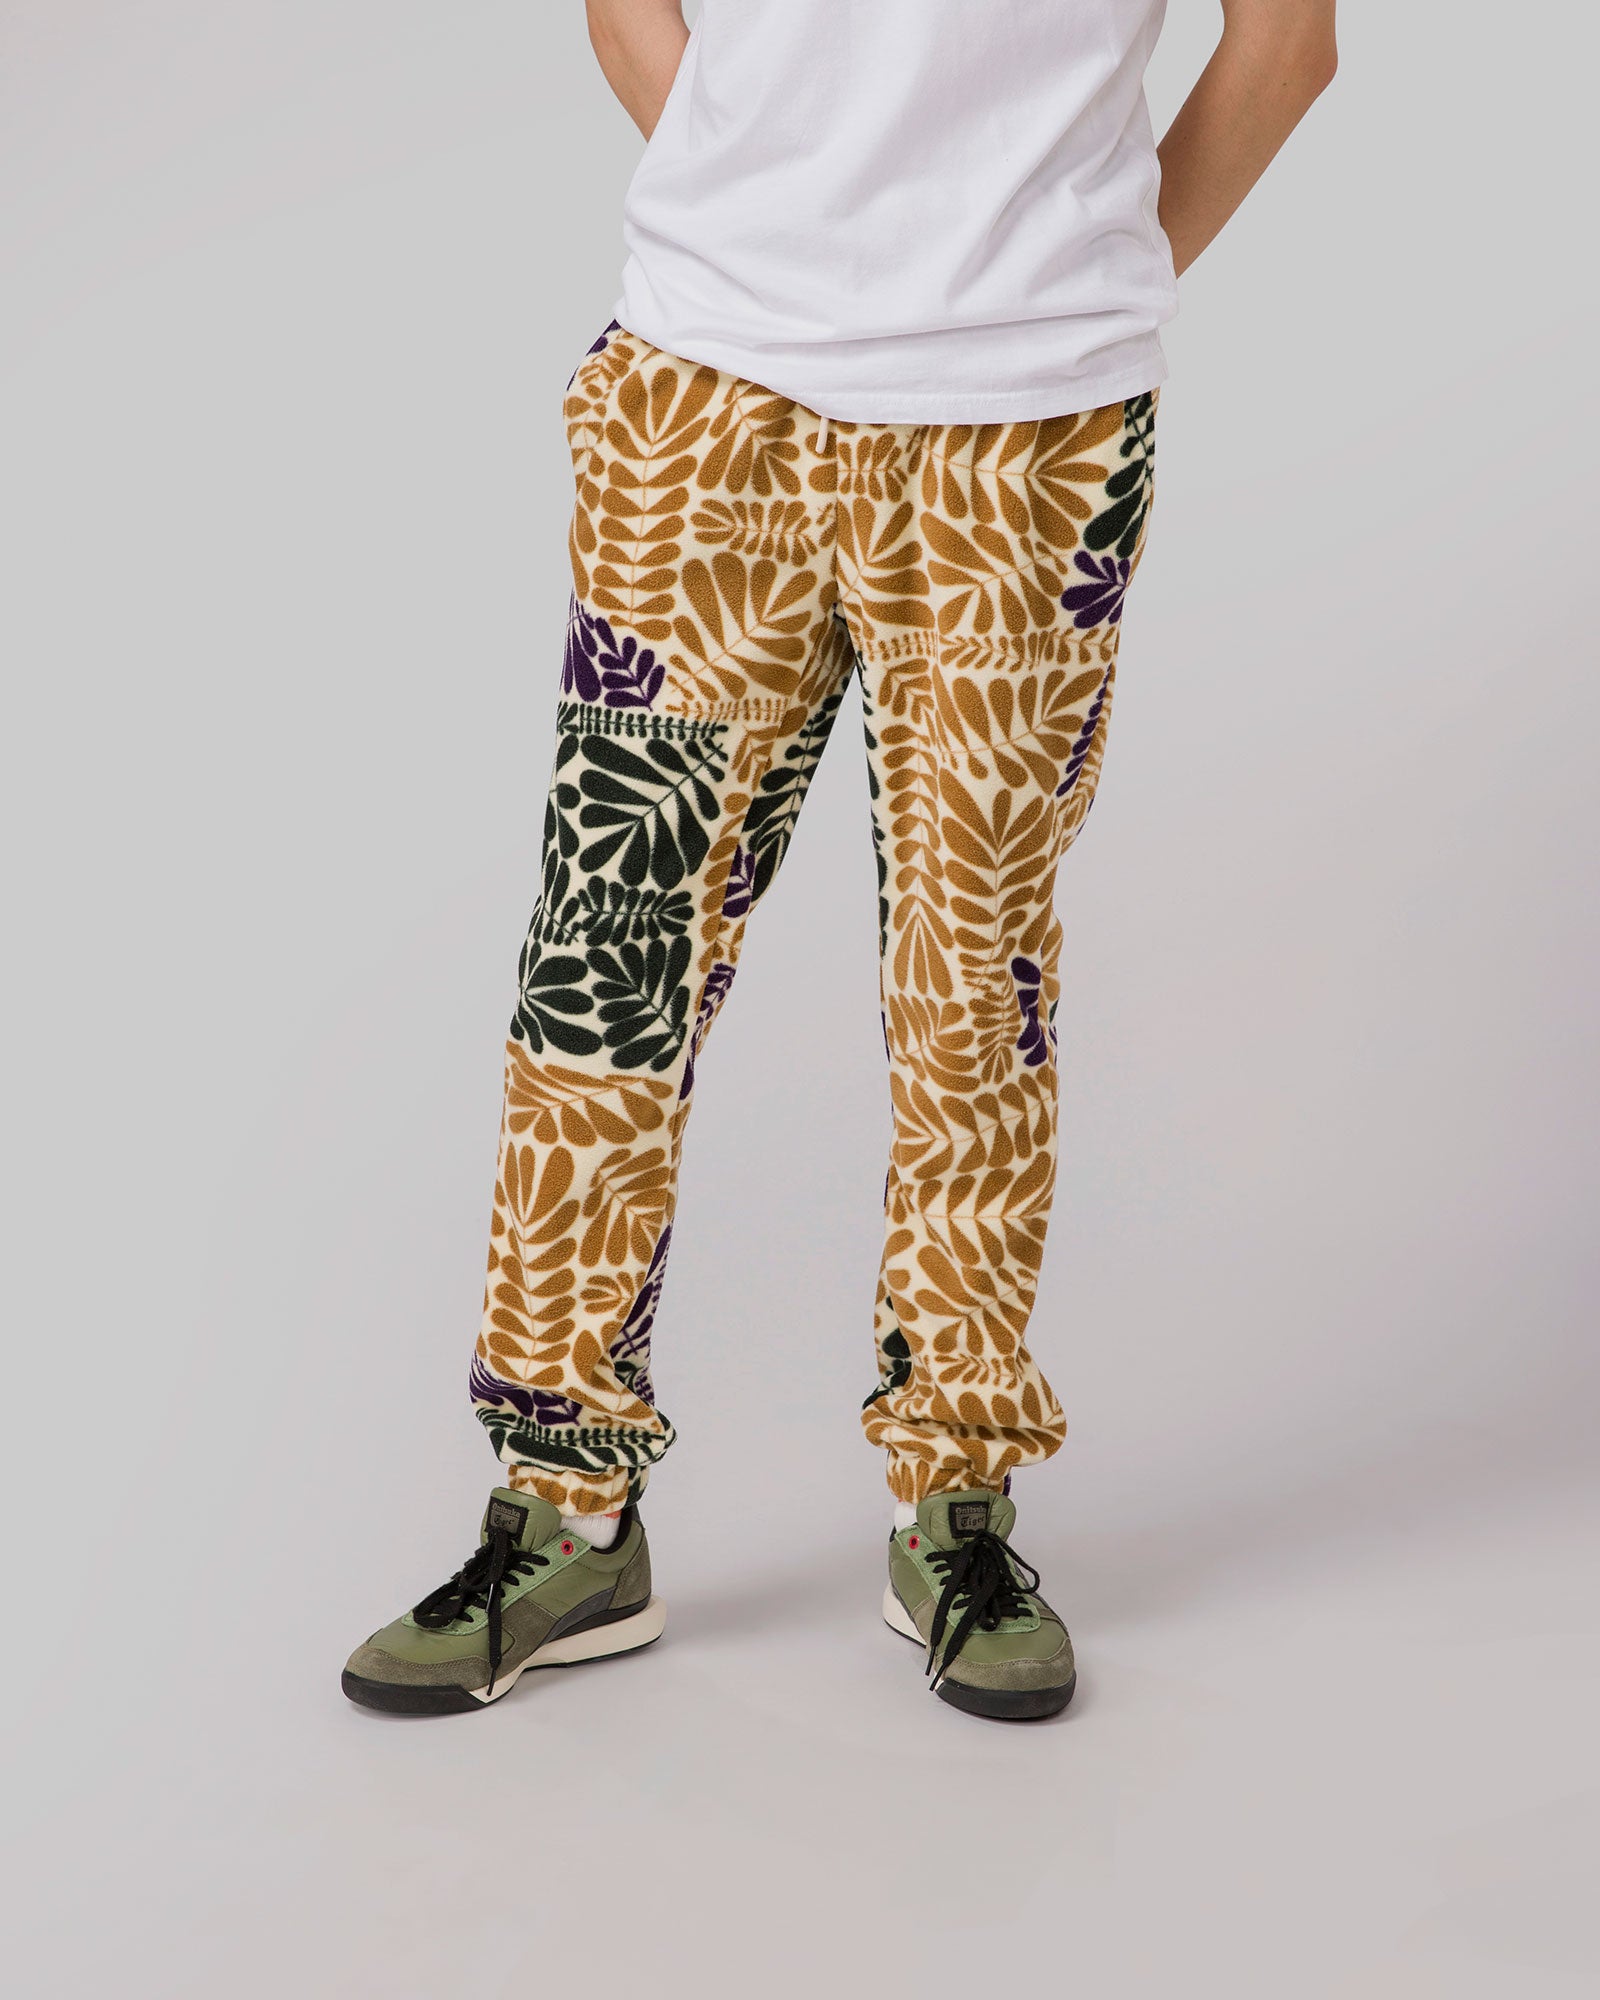 Fern-Patterned Fleece Joggers Inspired By Big Sur National Park